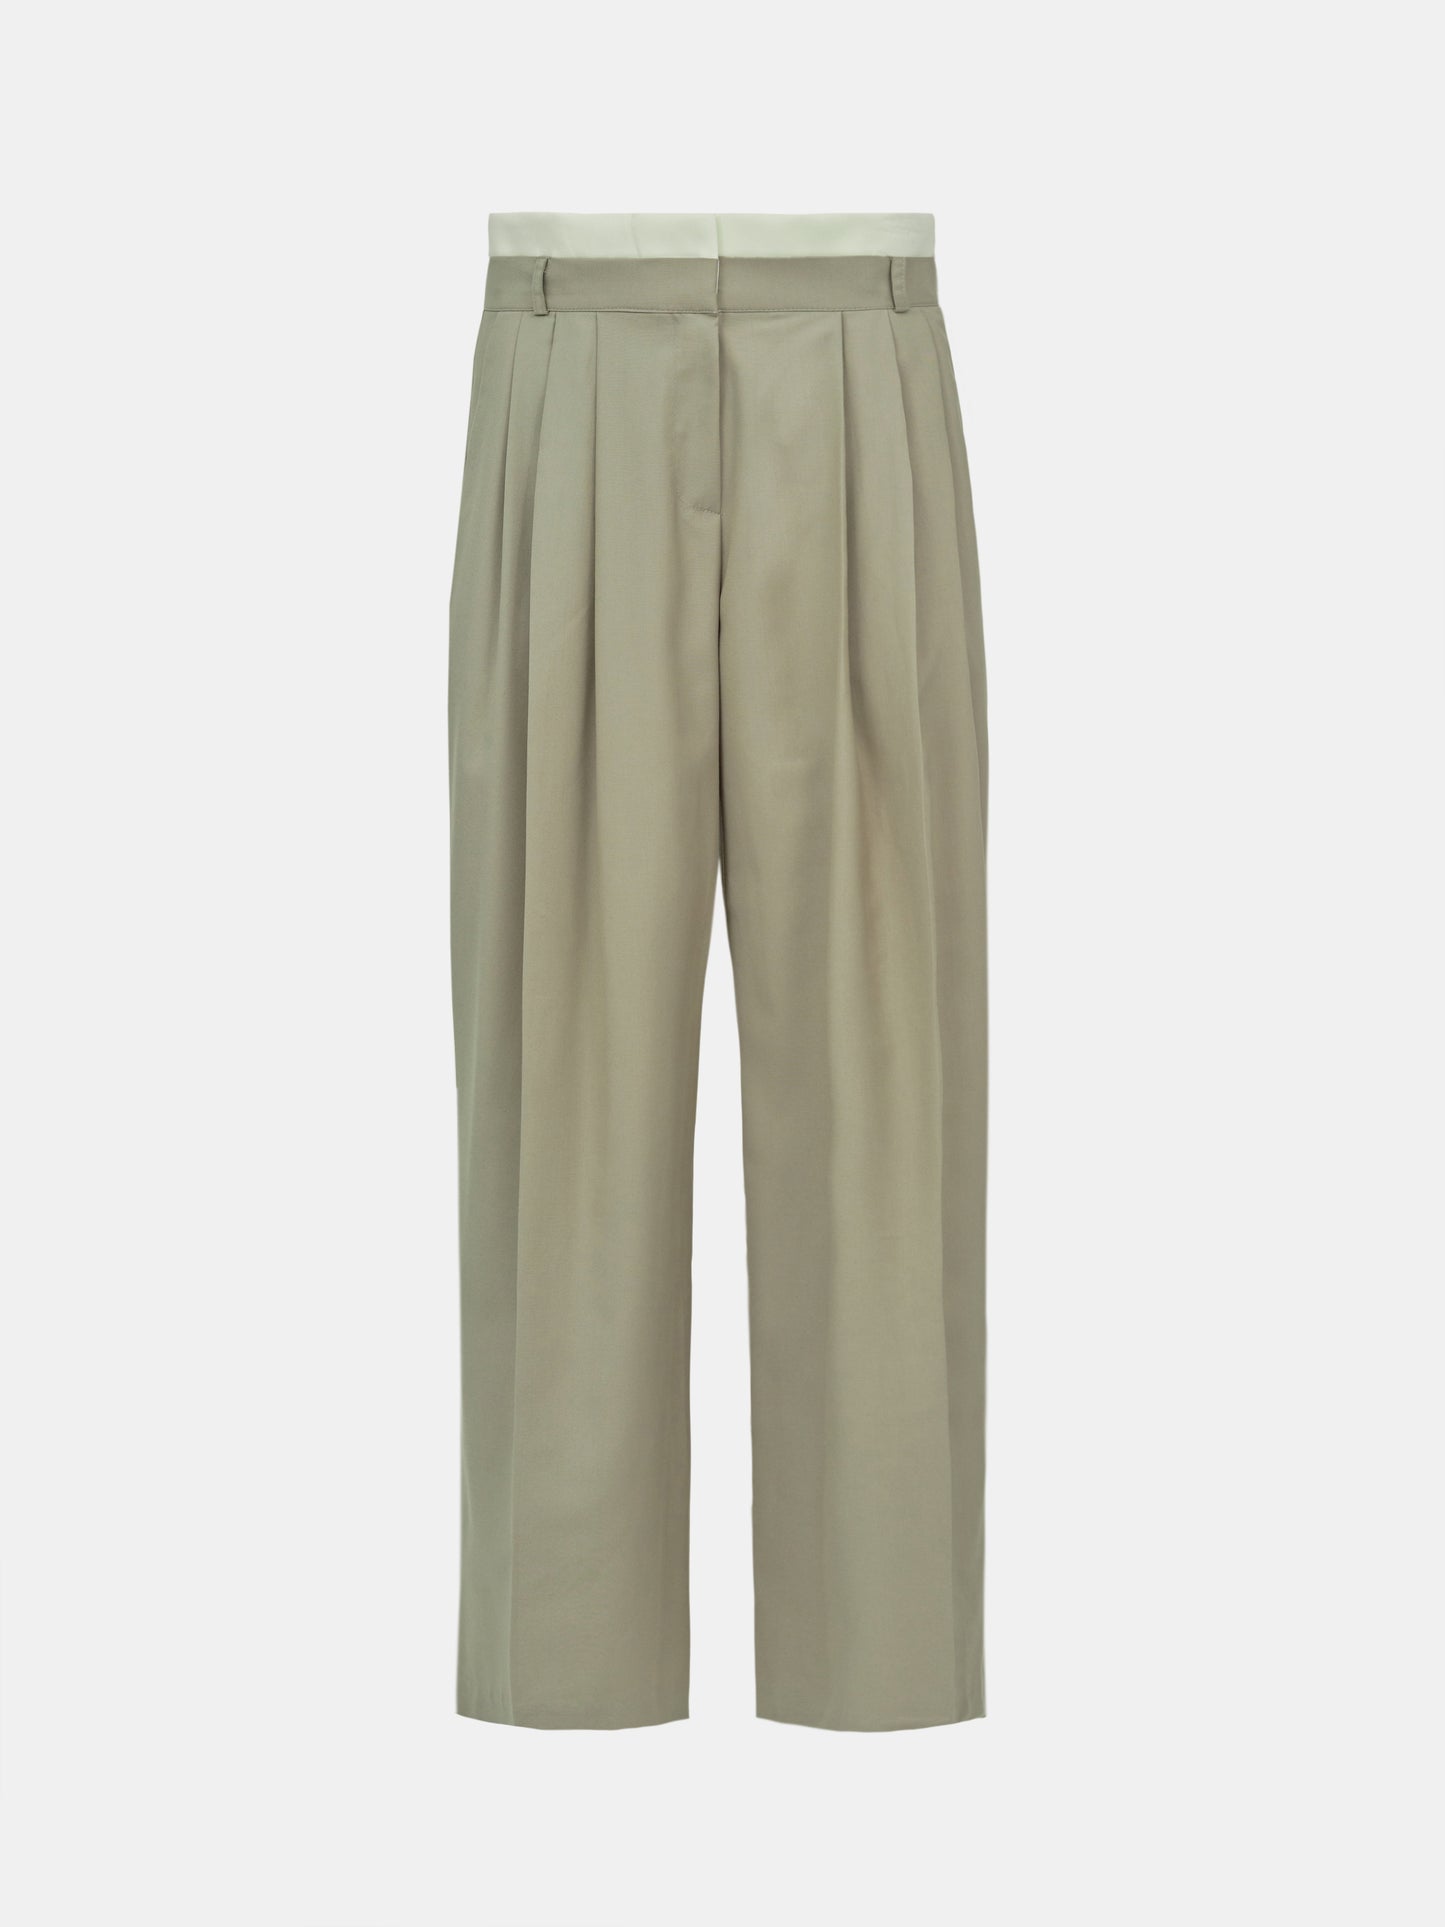 Layered Waistband Trousers, Beige – SourceUnknown